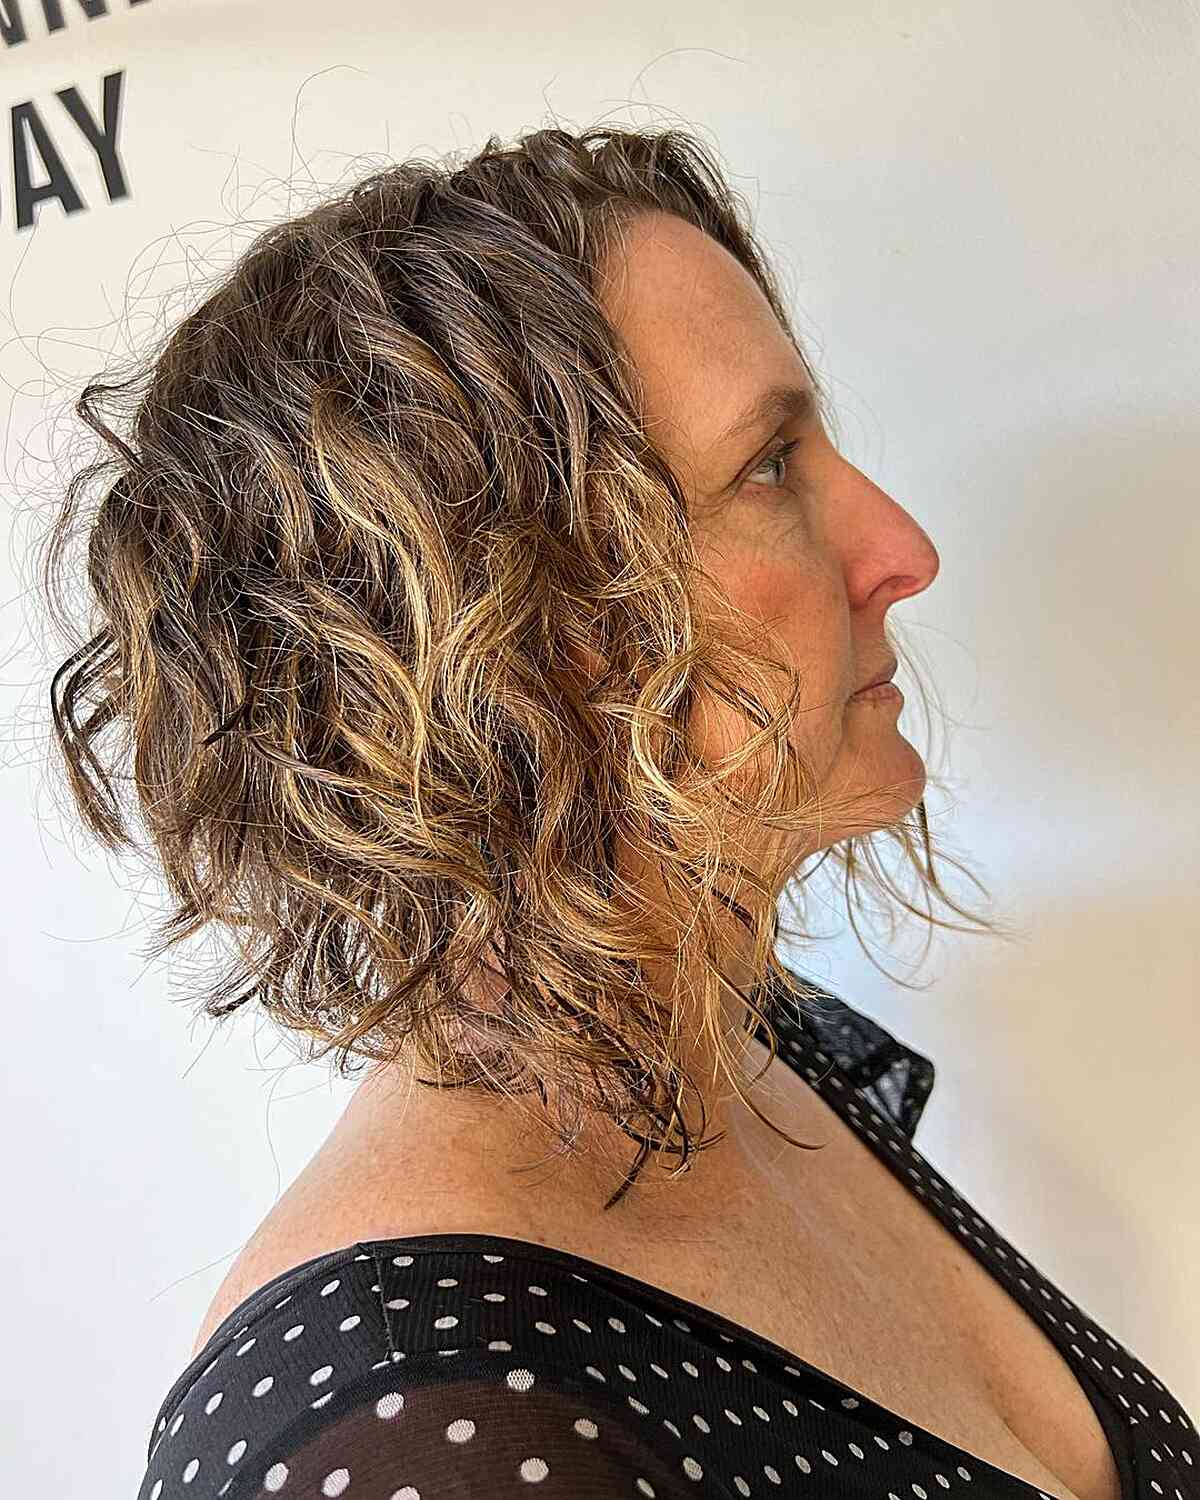 Short A-Line Cut with Curly and Choppy Layers for Mature Women Aged 60